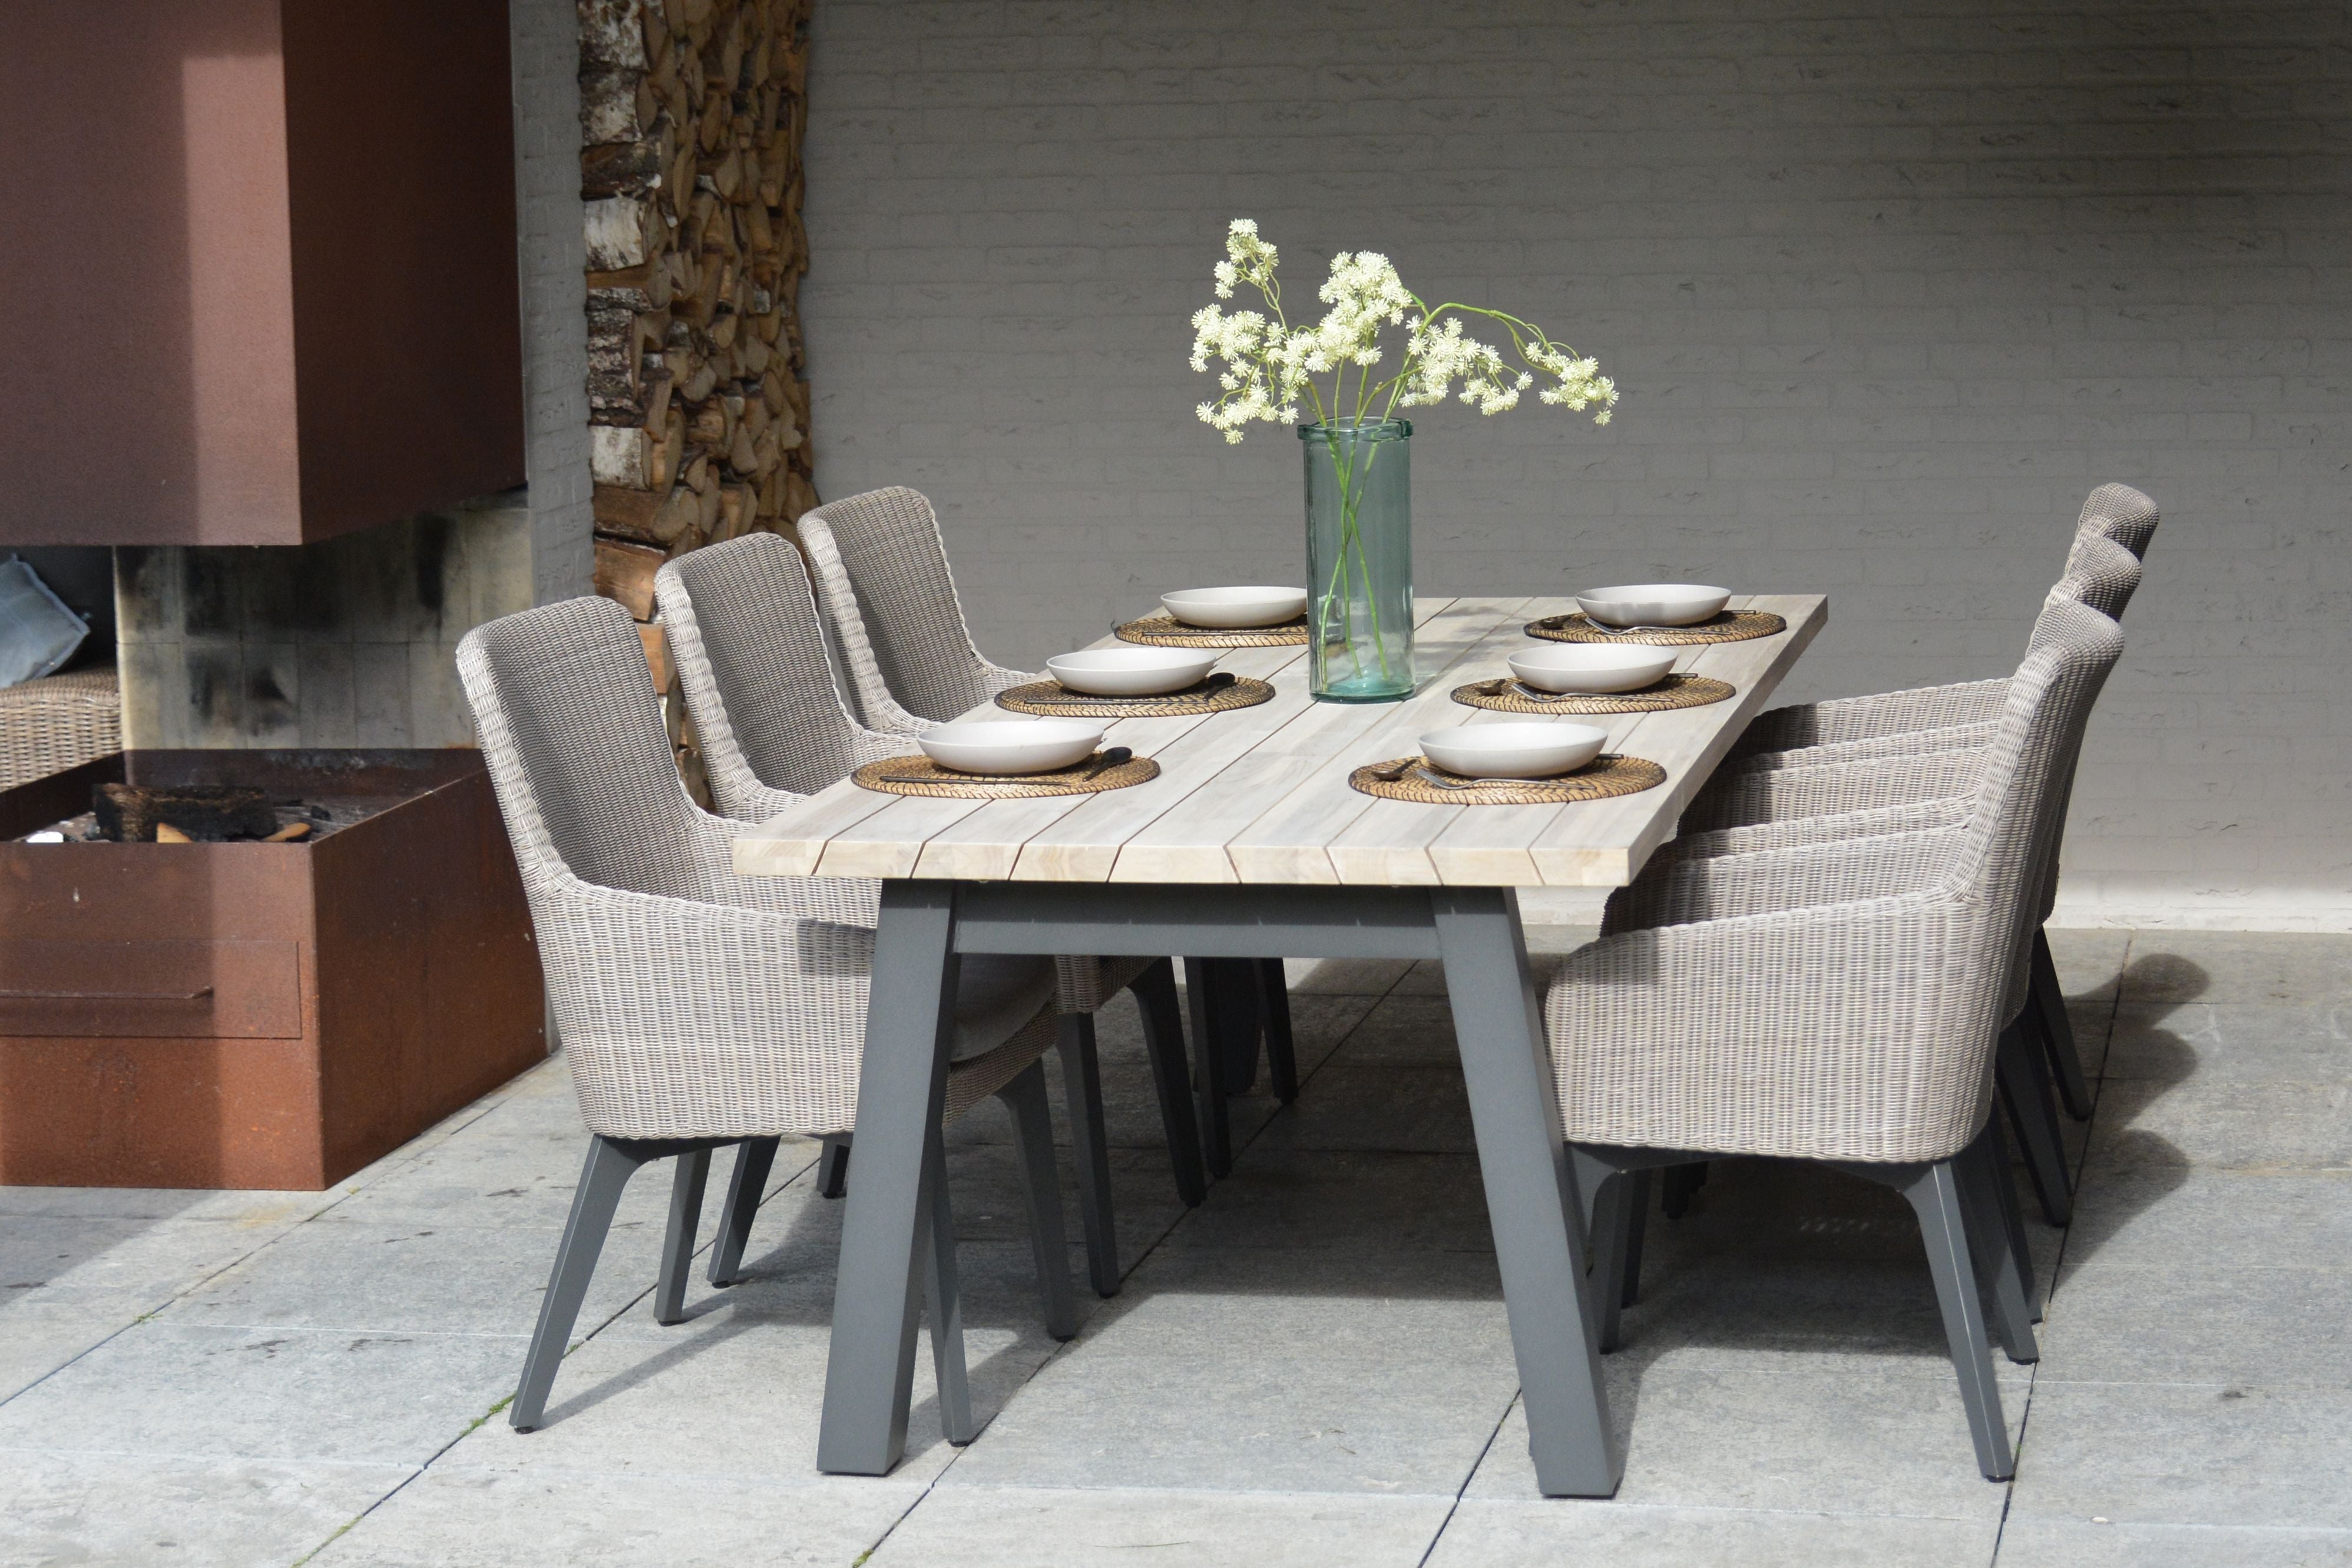 4 Seasons Outdoor Derby 6 seat Dining Set